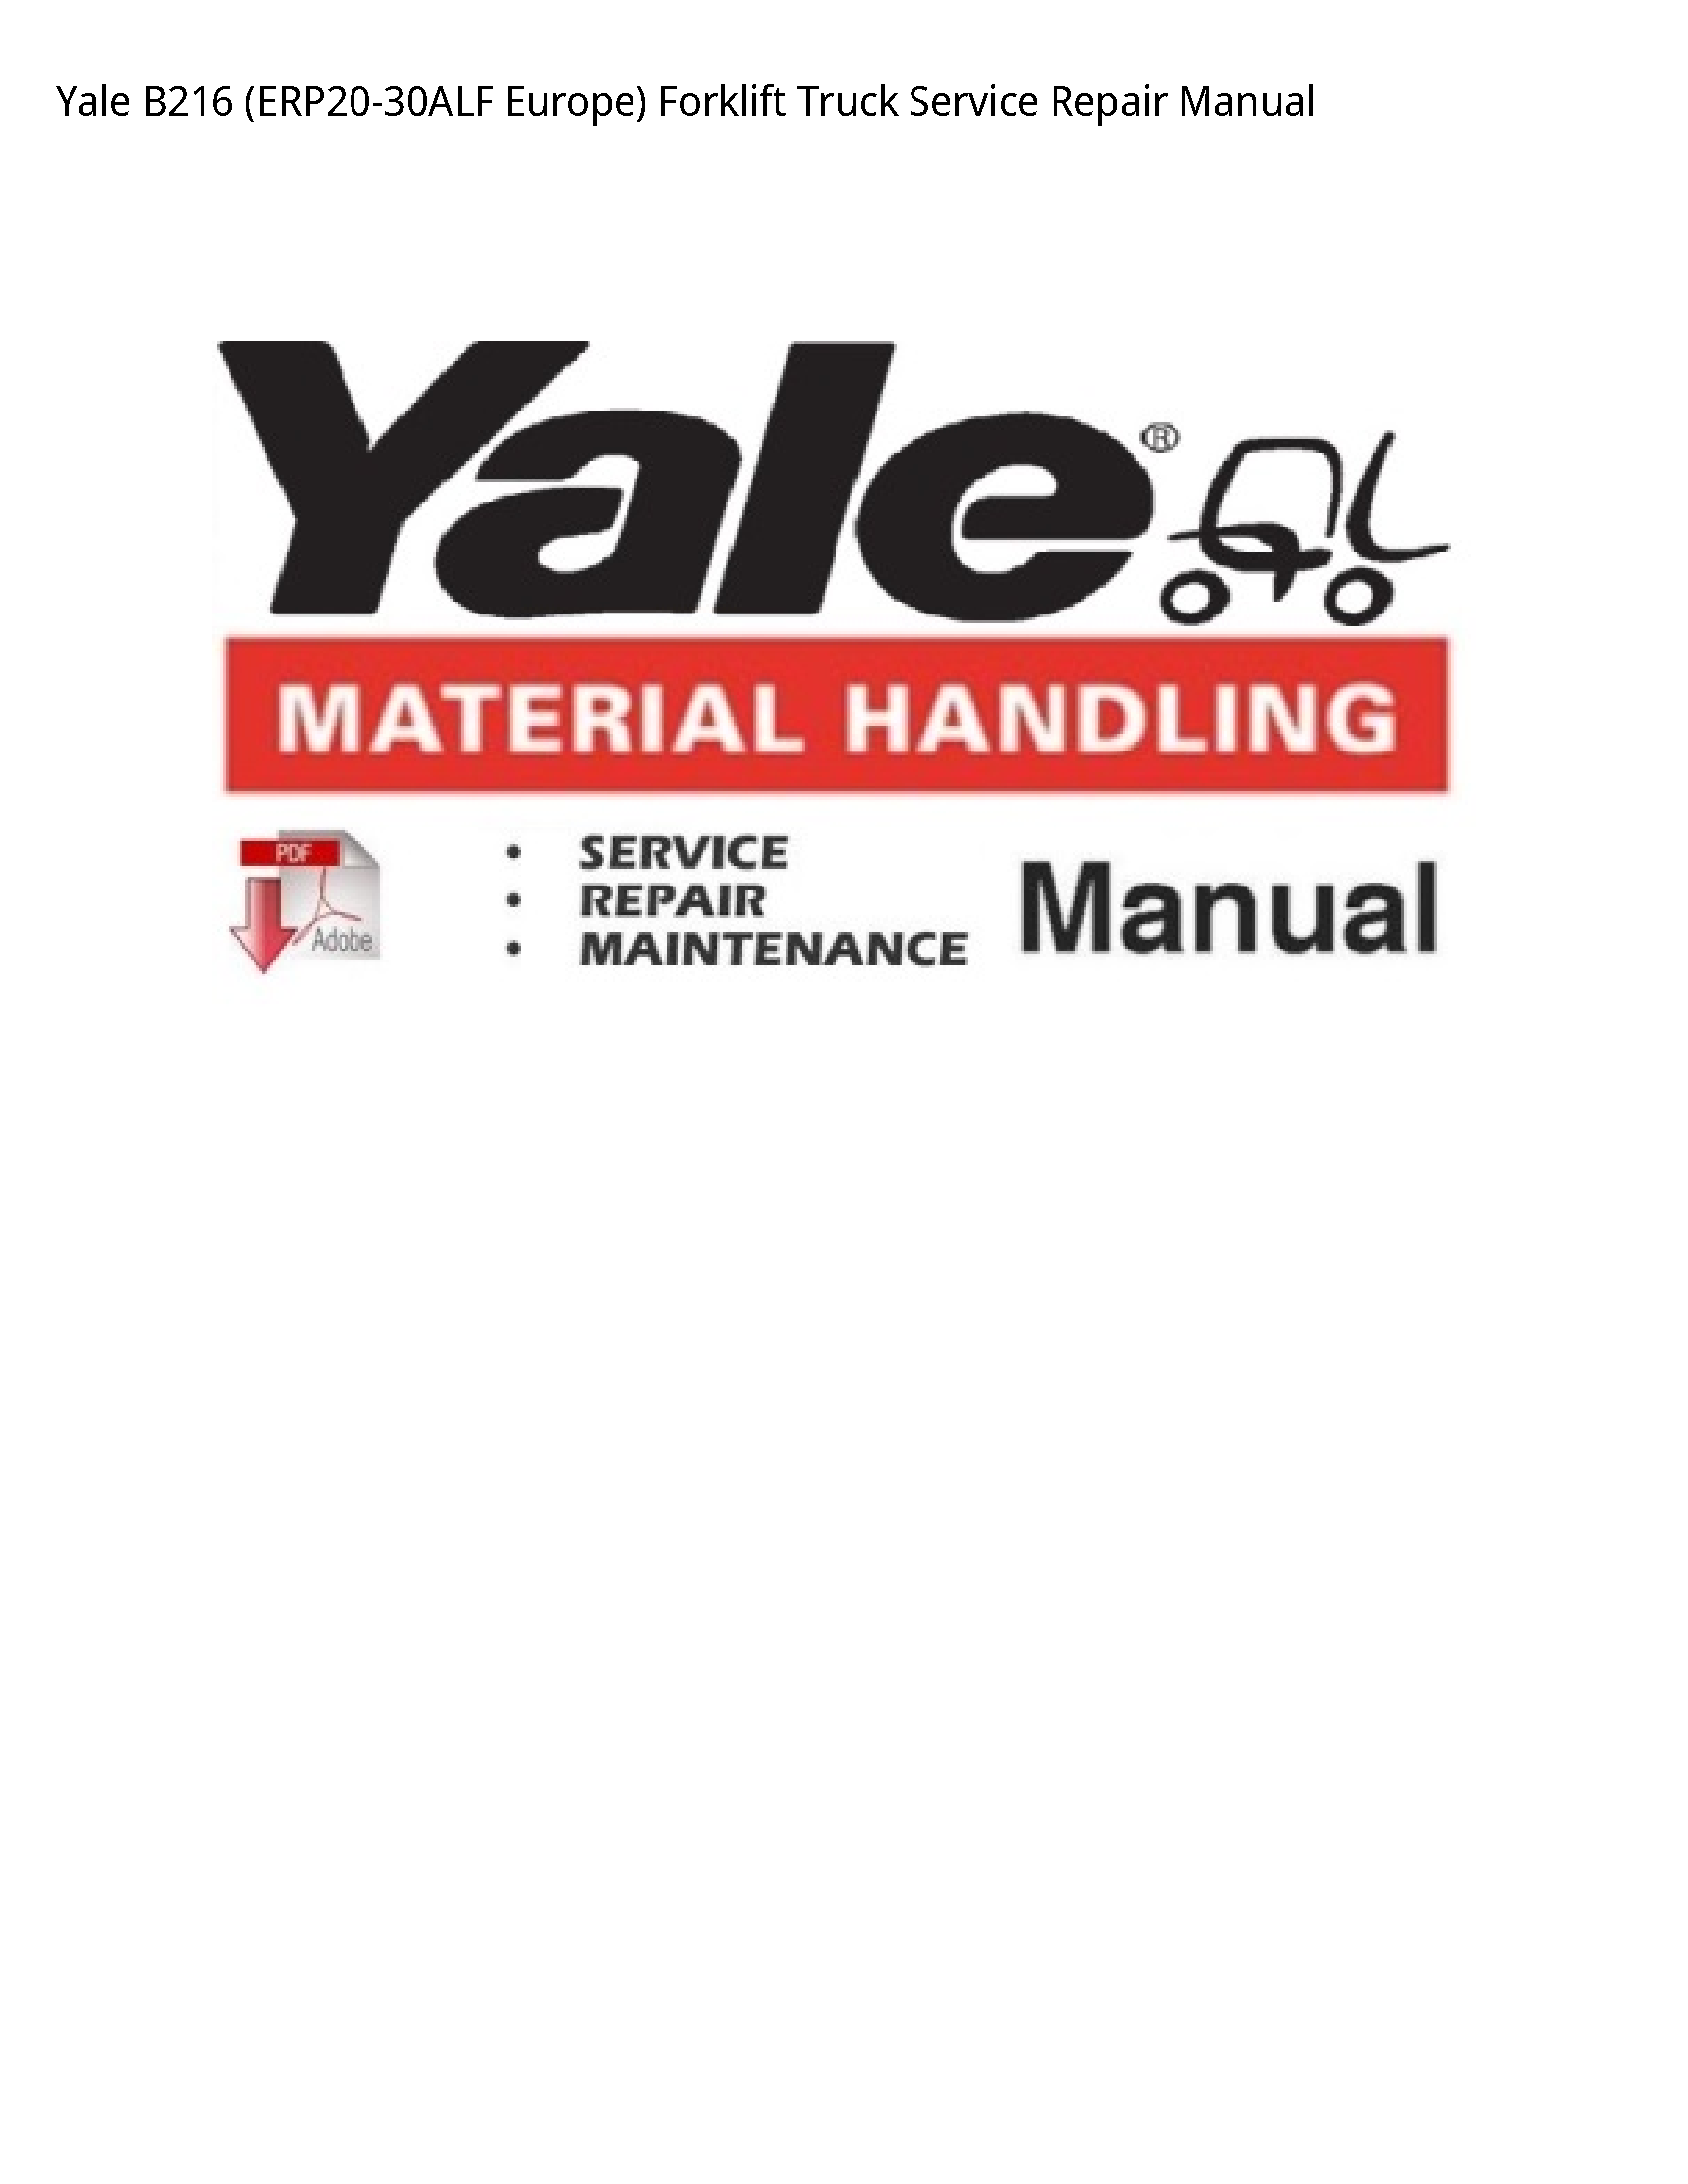 Yale B216 Europe) Forklift Truck manual